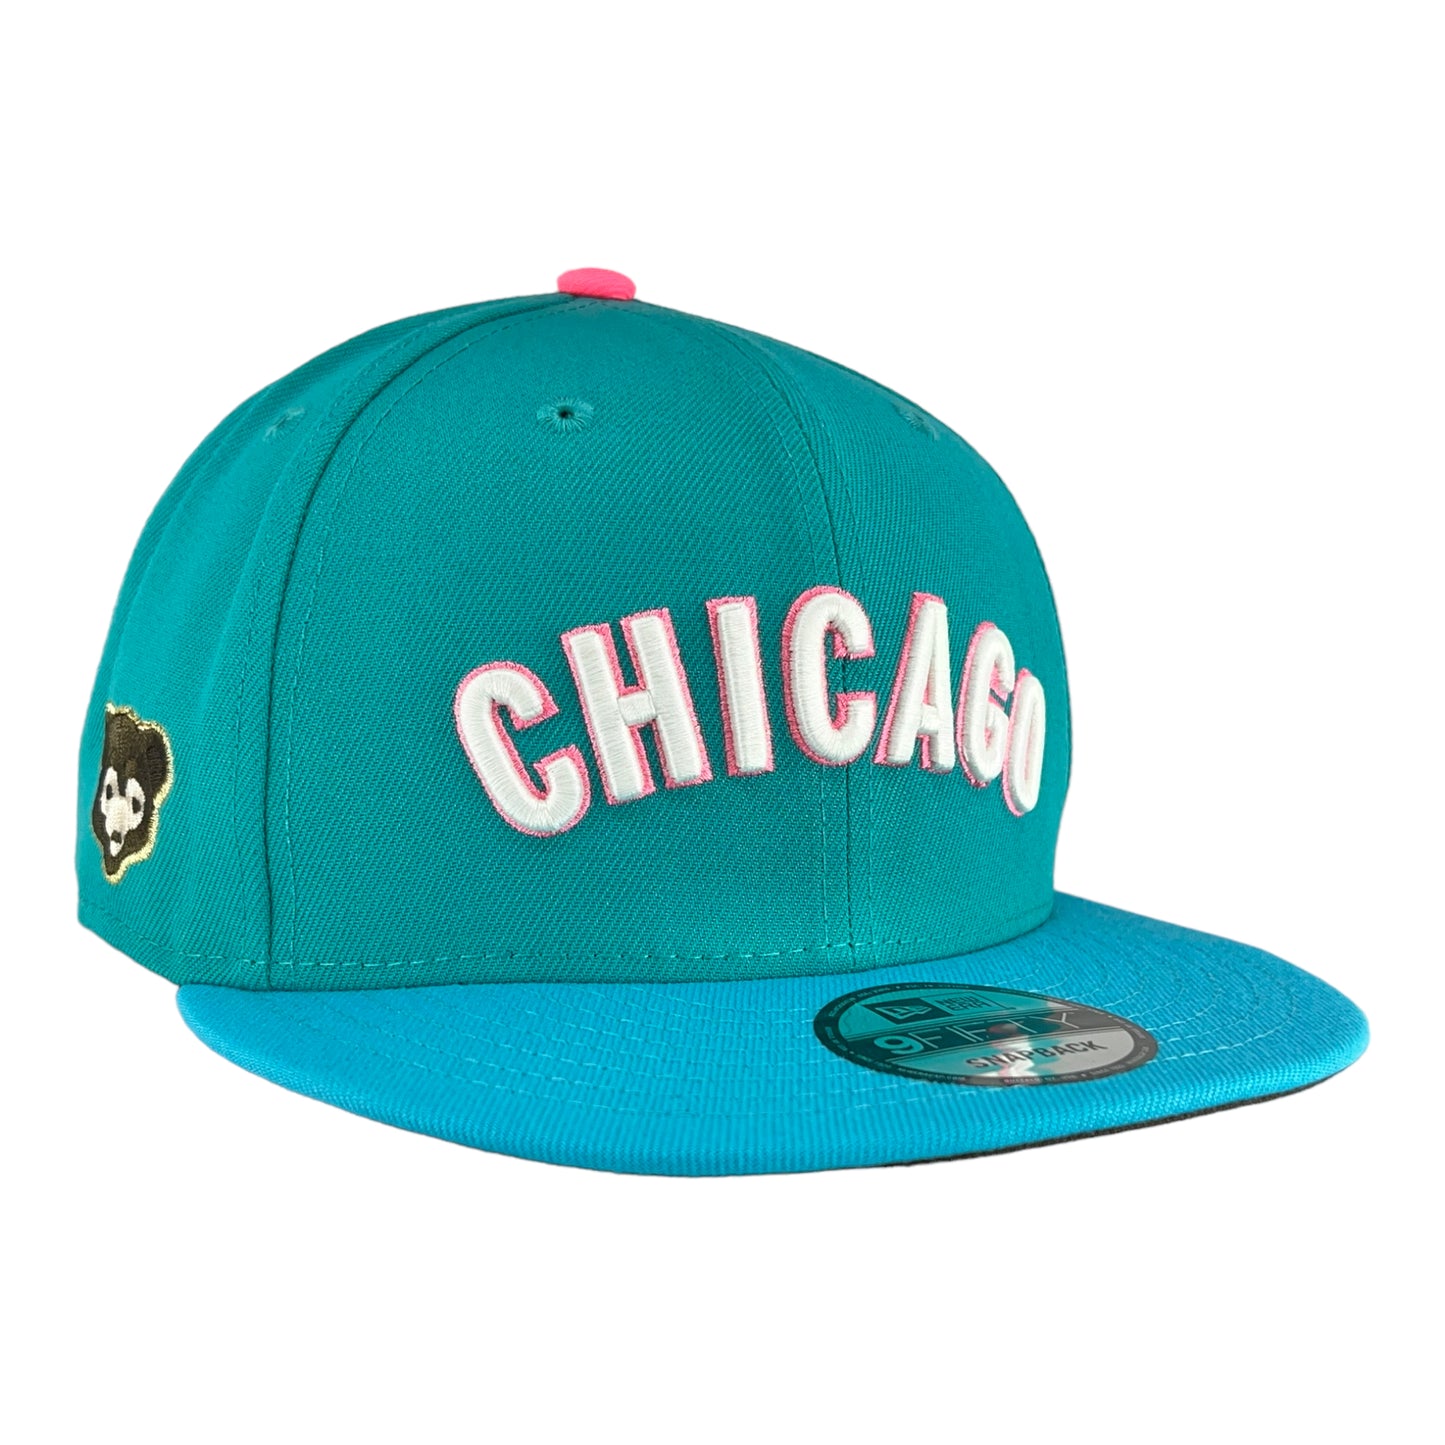 Chicago Cubs Teal/Pink New Era Low Profile 9FIFTY Snapback Hat